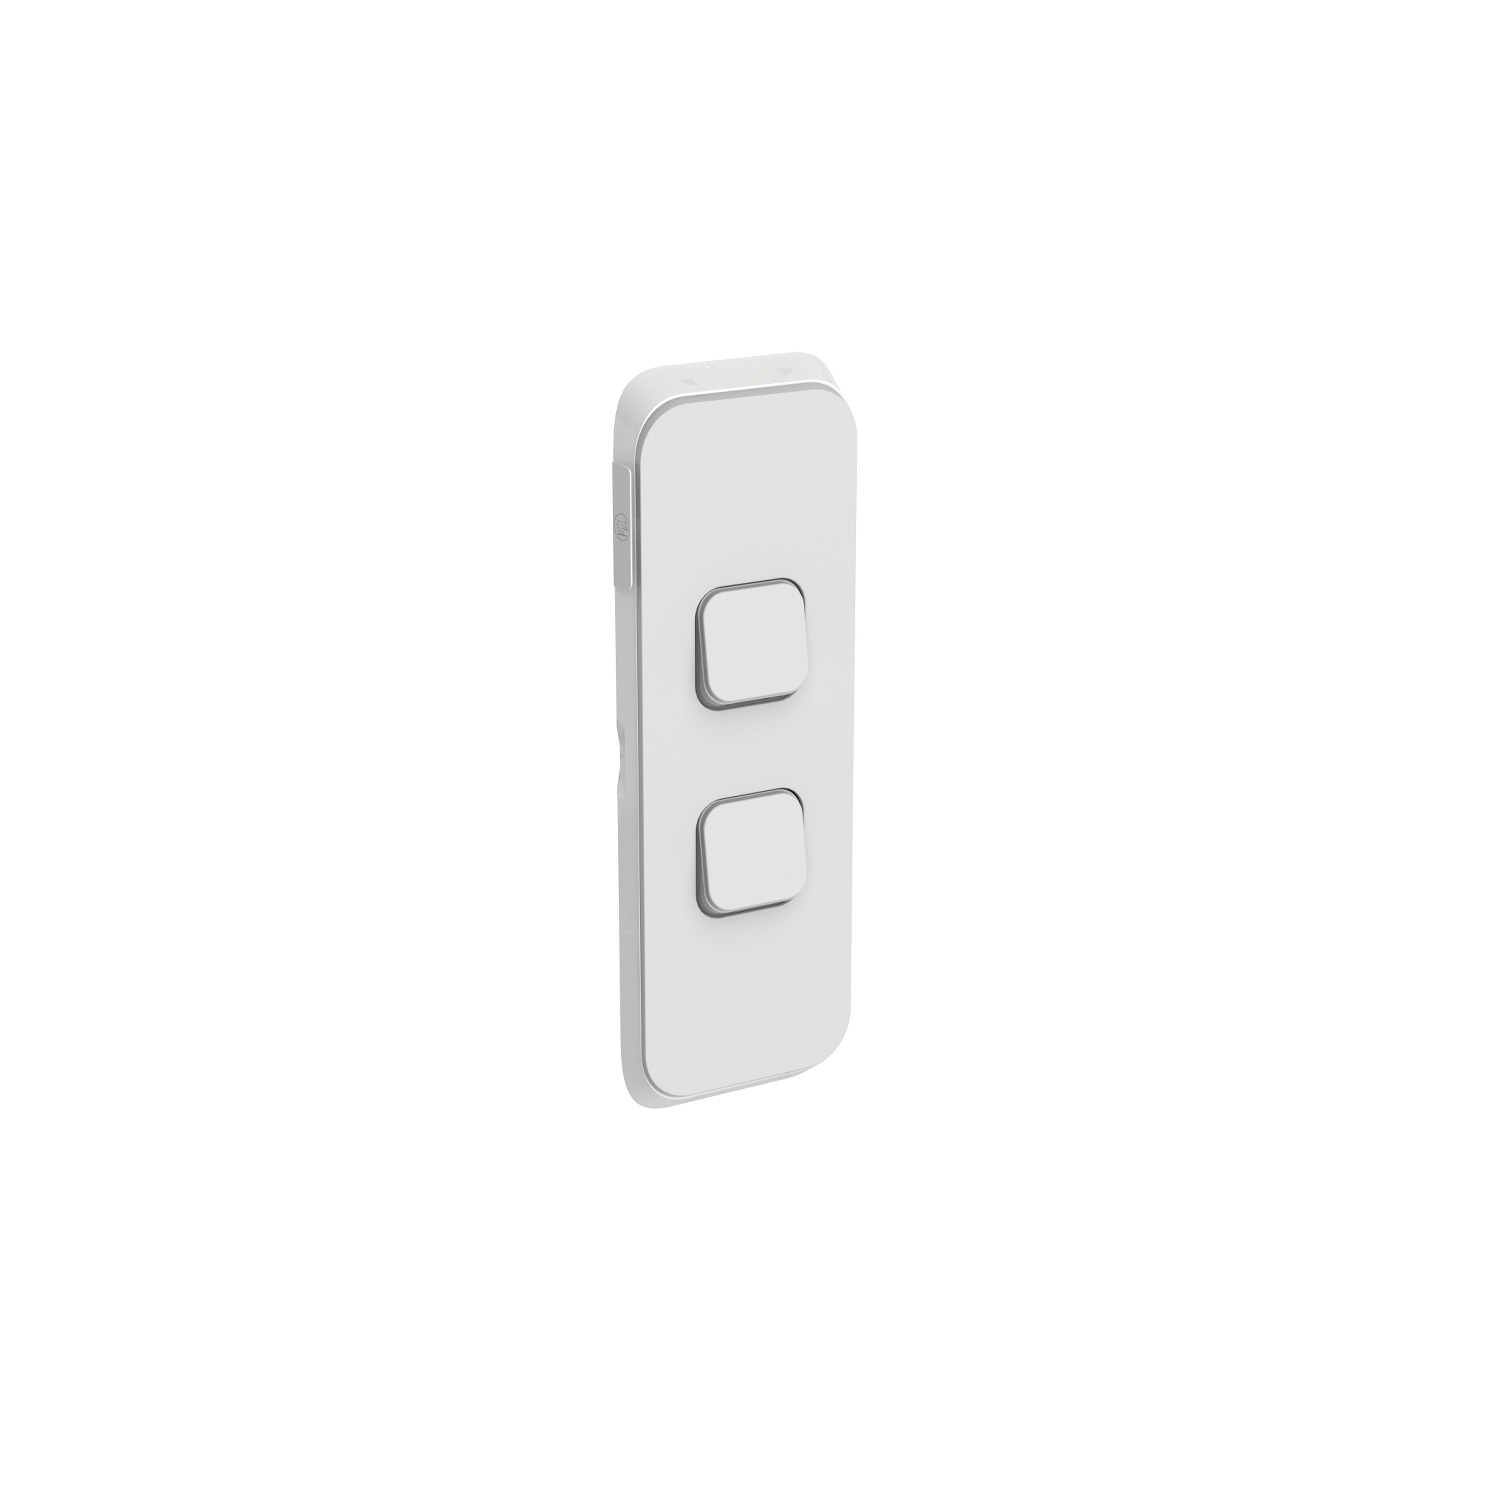 PDL362C-CY - PDL Iconic Cover Plate Switch Architrave 2Gang - Cool Grey